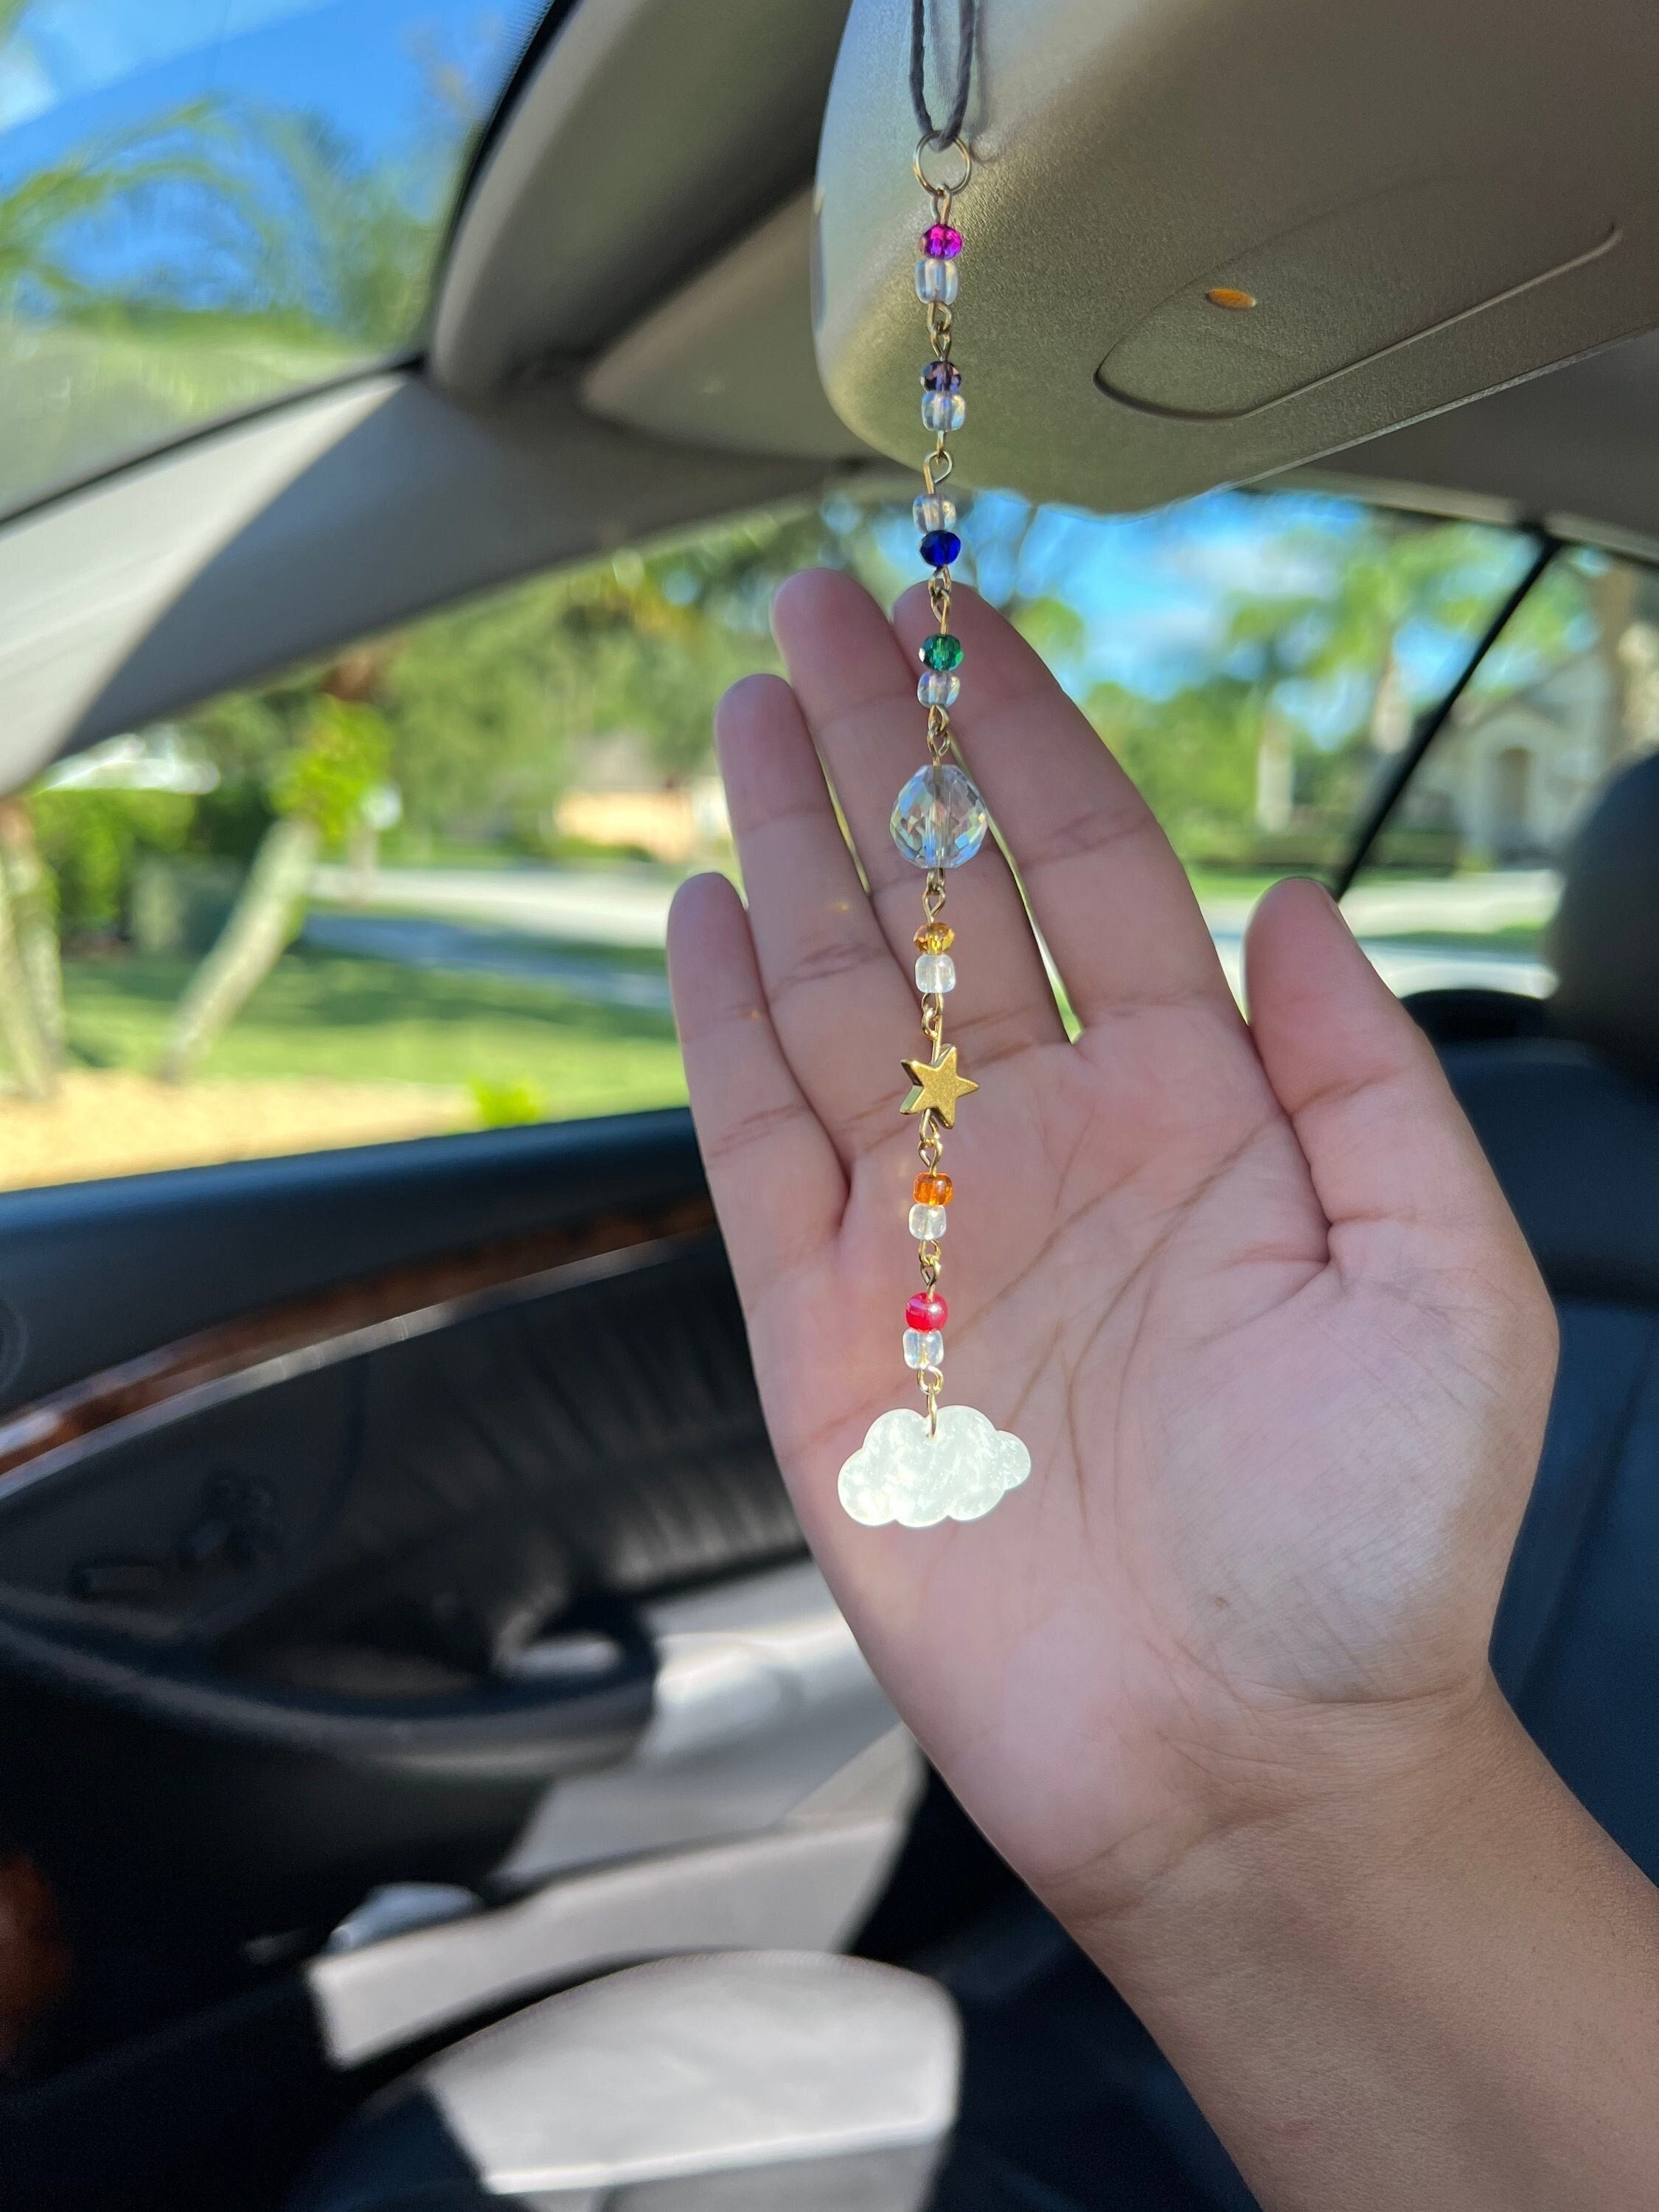 Car Charm Rear View Mirror Accessory Car Sun Catcher dainty Hanging Car  Decor beaded Car Mirror Charmgift for Momgift for New Driver 